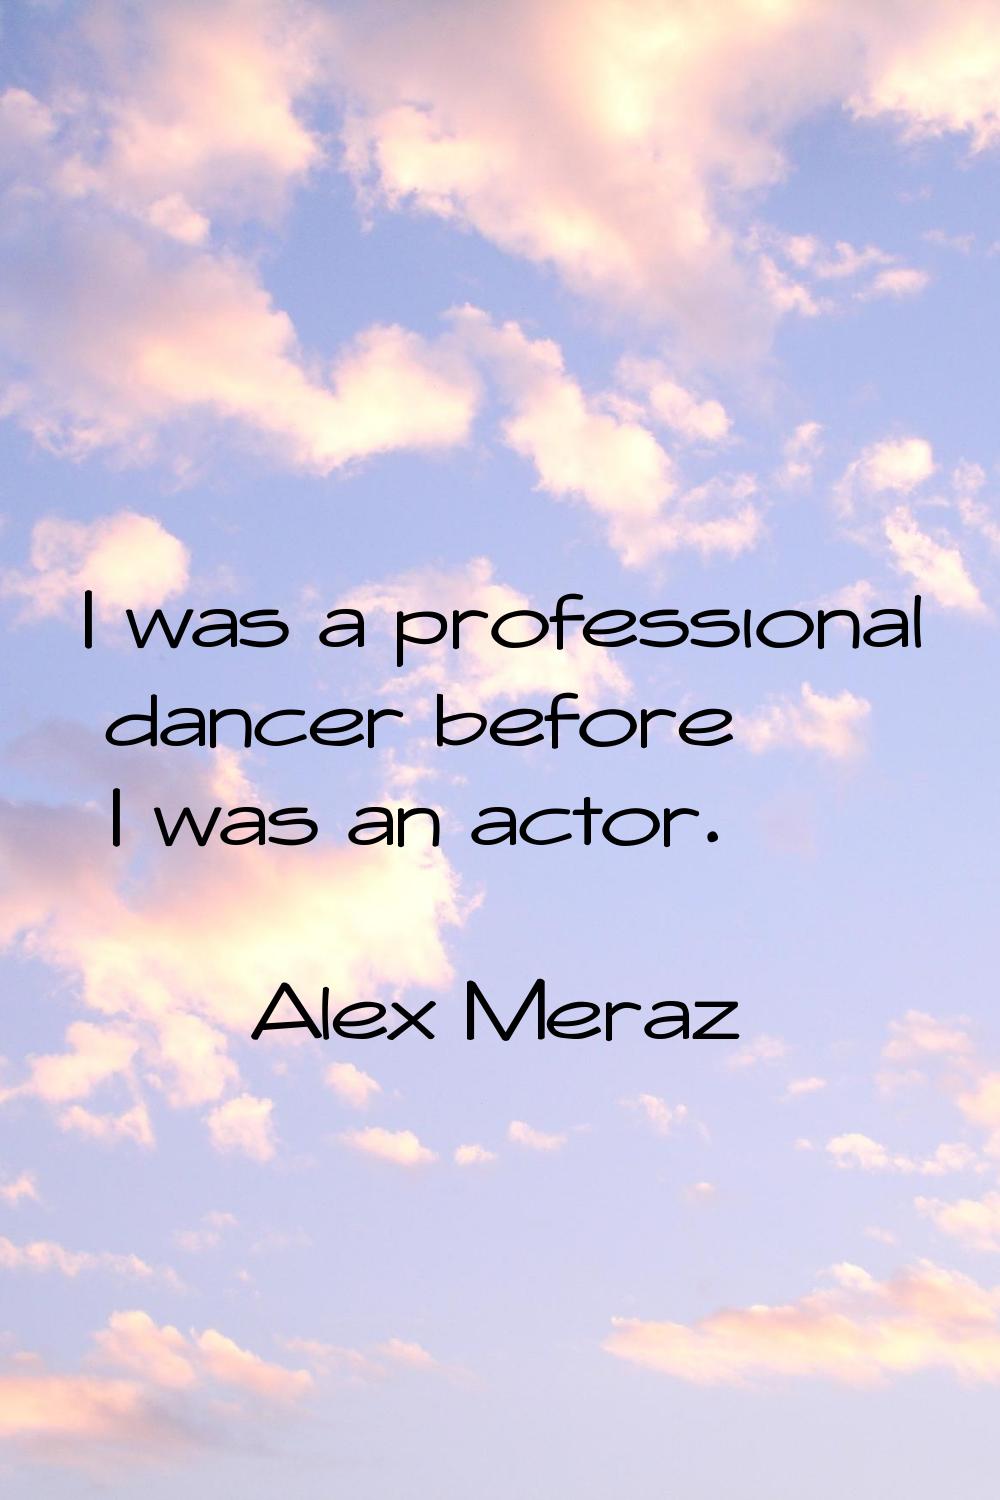 I was a professional dancer before I was an actor.